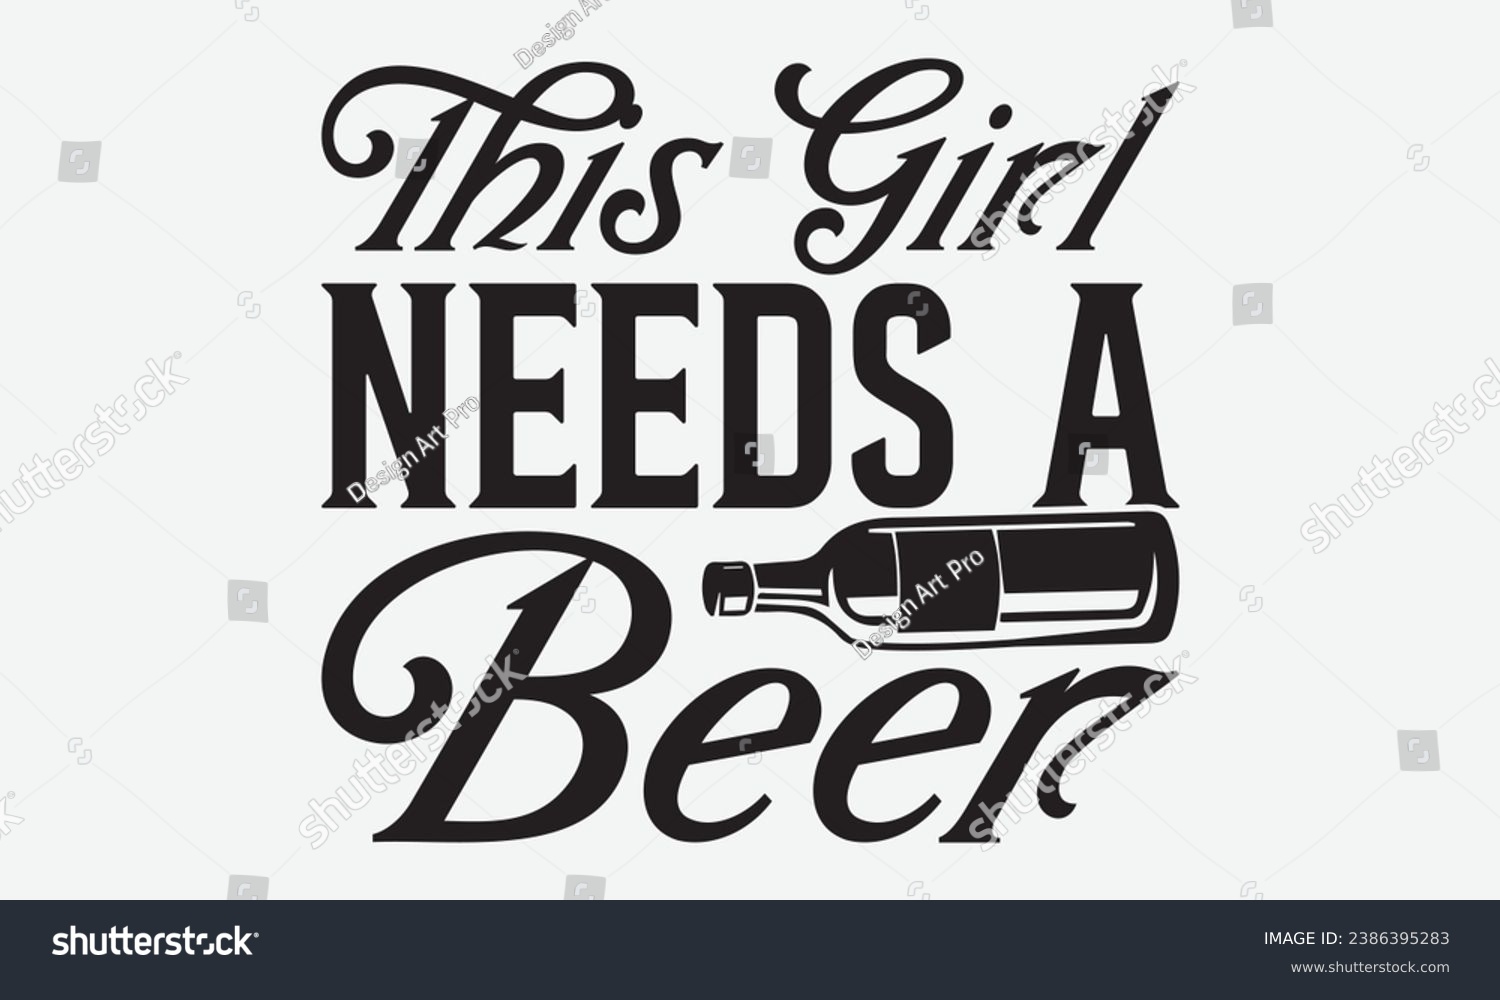 SVG of This Girl Needs A Beer -Beer T-Shirt Design, Calligraphy Graphic Design, For Mugs, Pillows, Cutting Machine, Silhouette Cameo, Cricut. svg